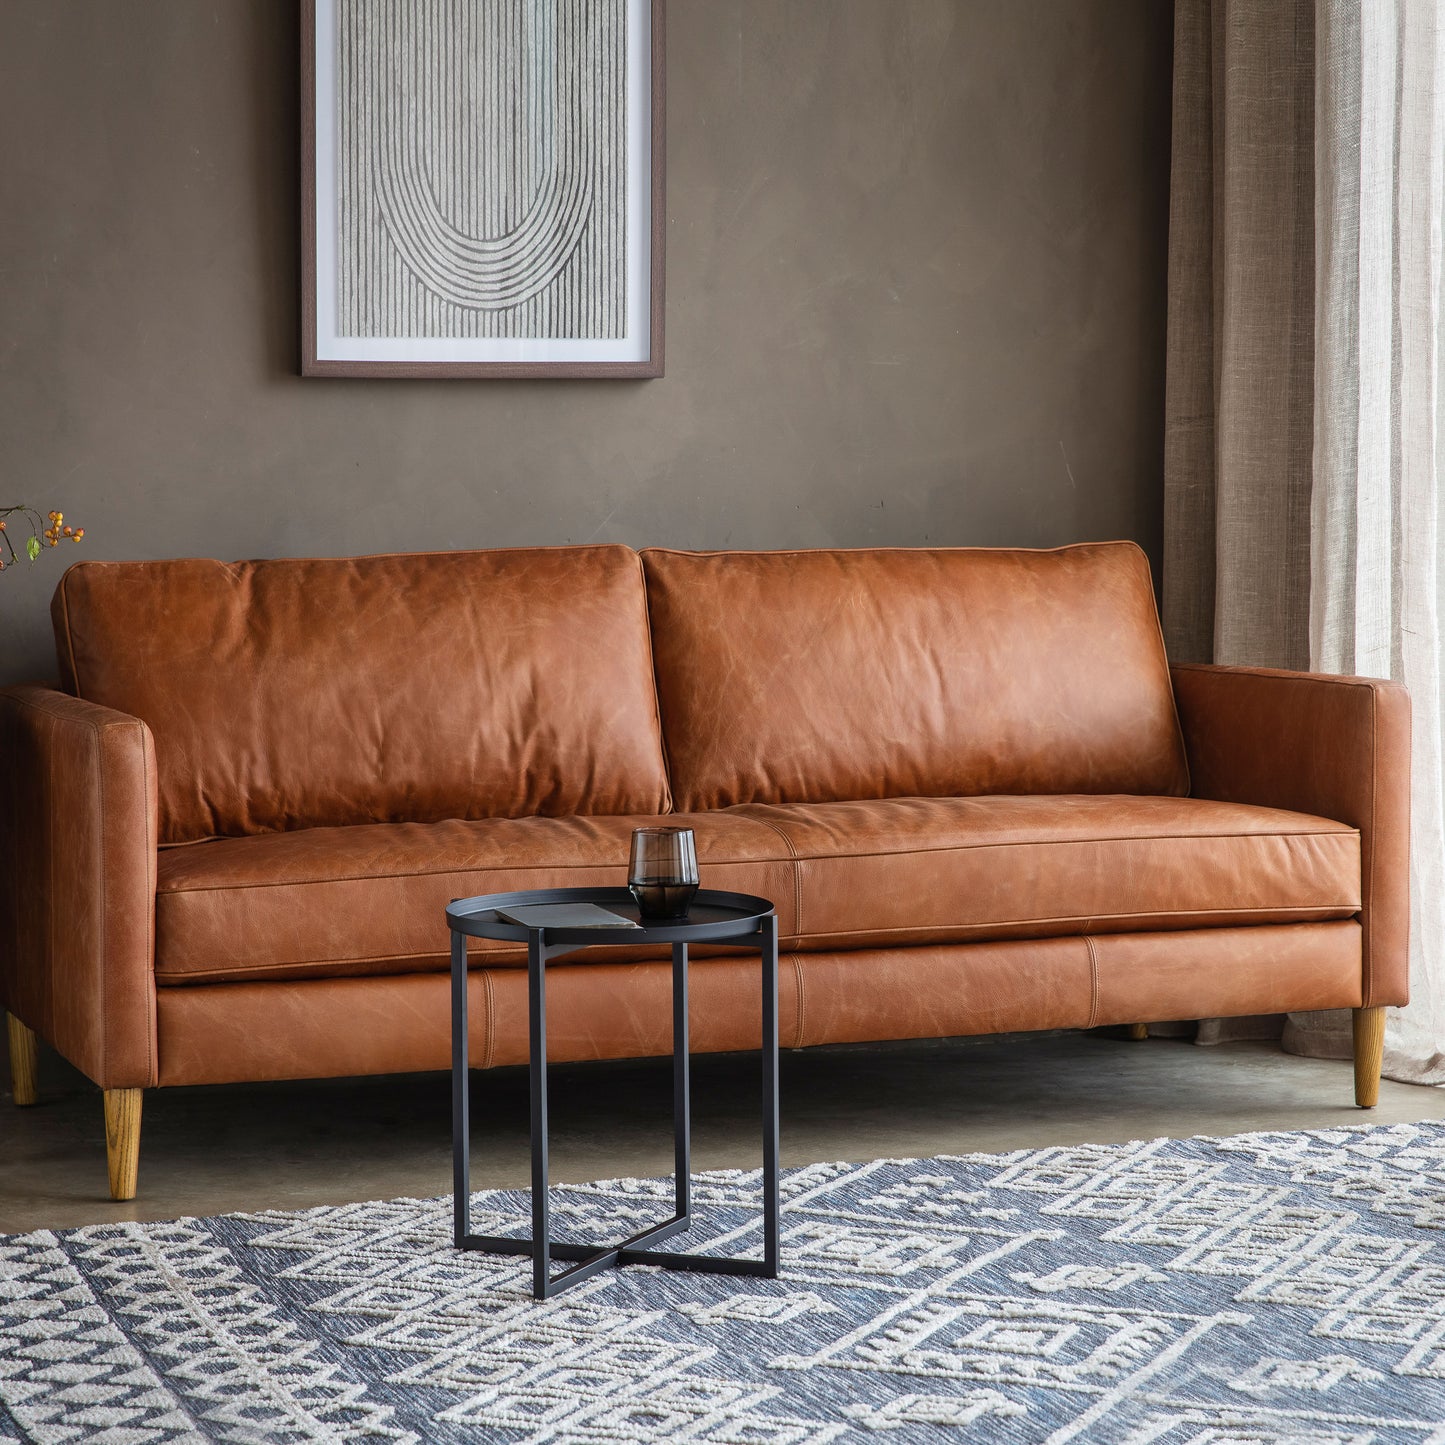 Load image into Gallery viewer, An Osborne 2 Seater Sofa Vintage Brown Leather by Kikiathome.co.uk, perfect for home furniture and interior decor in a living room.
